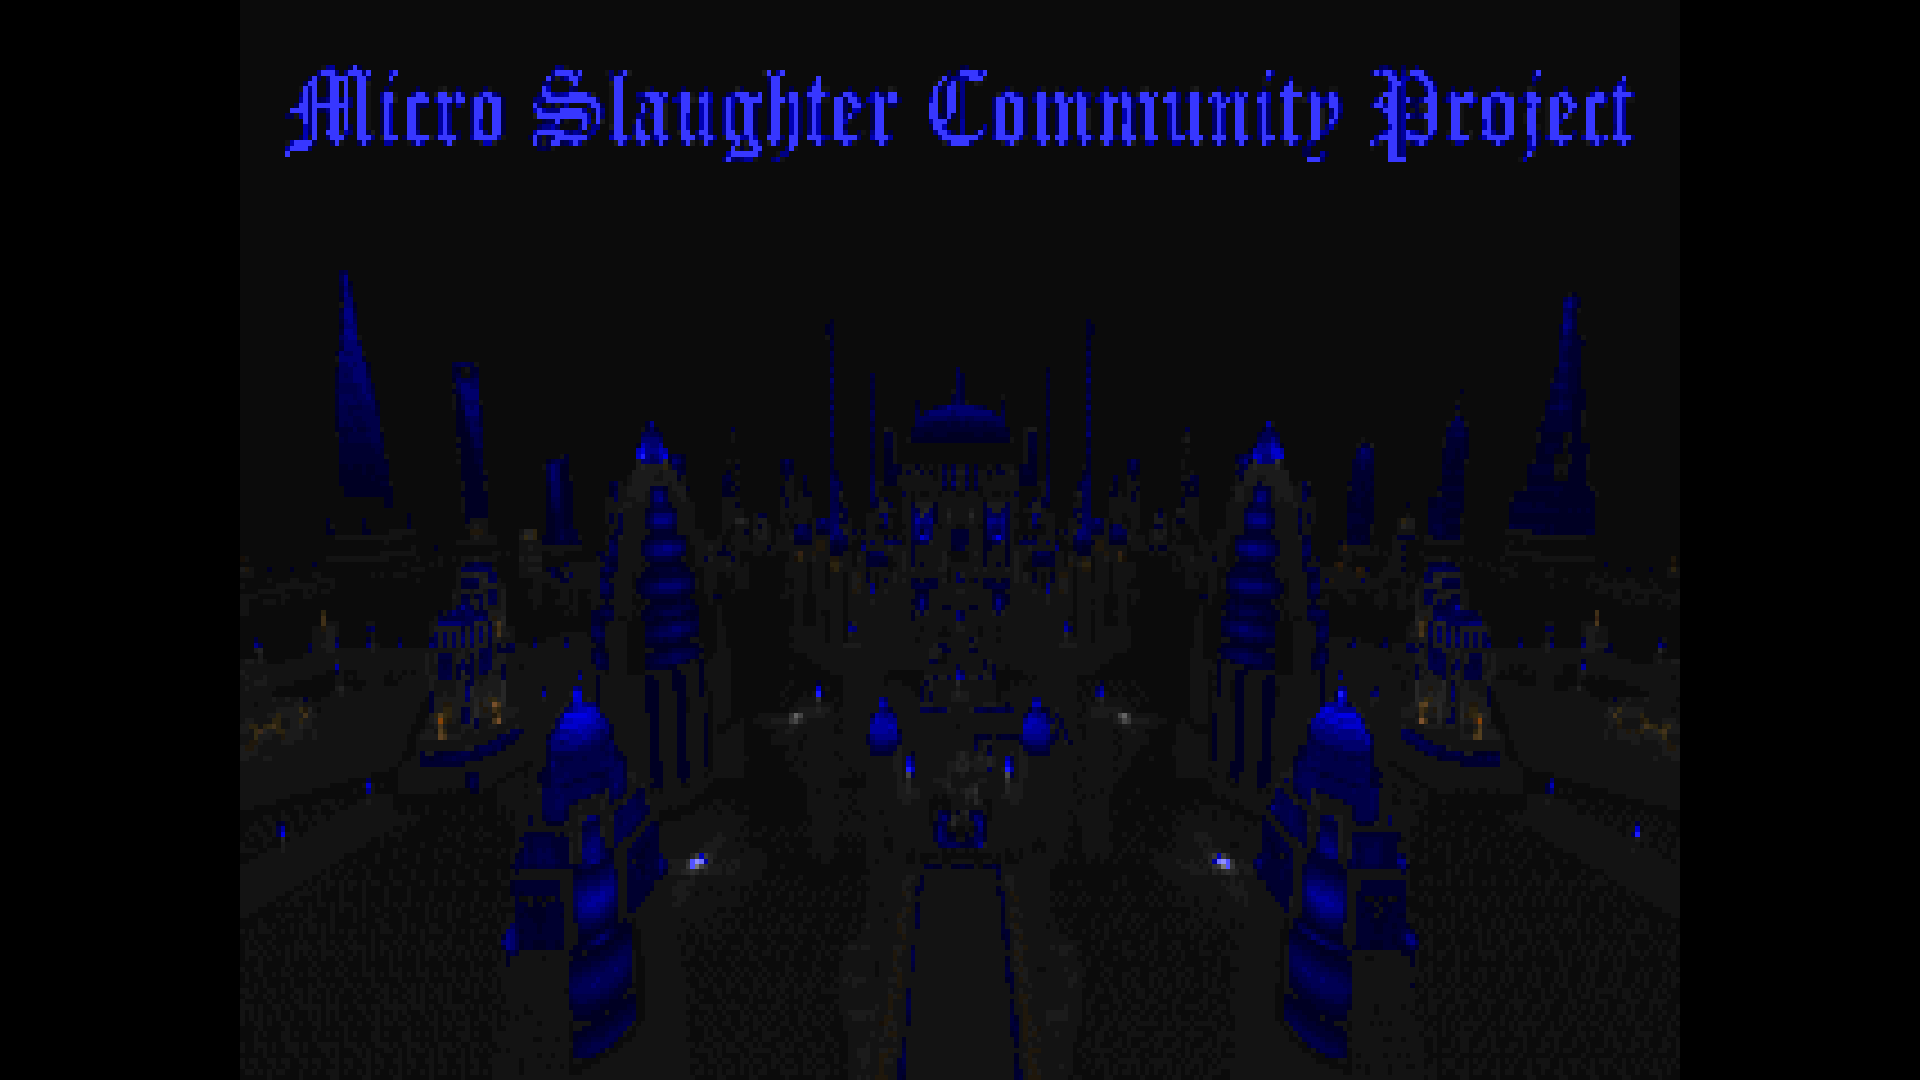 smooth_micro_slaughter_community_project